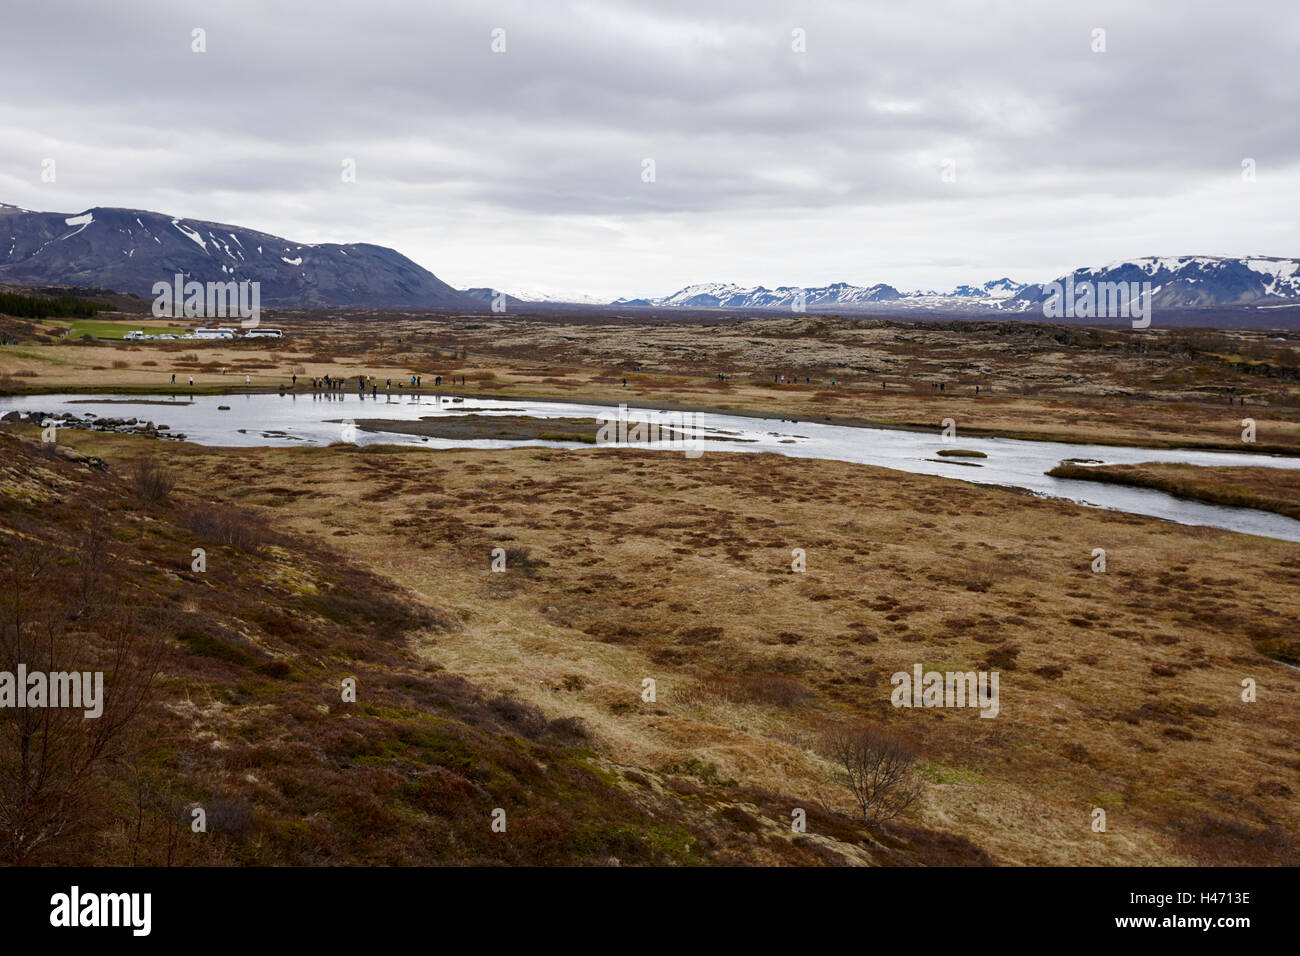 divide in the continental plates at thingvellir national park Iceland Stock Photo